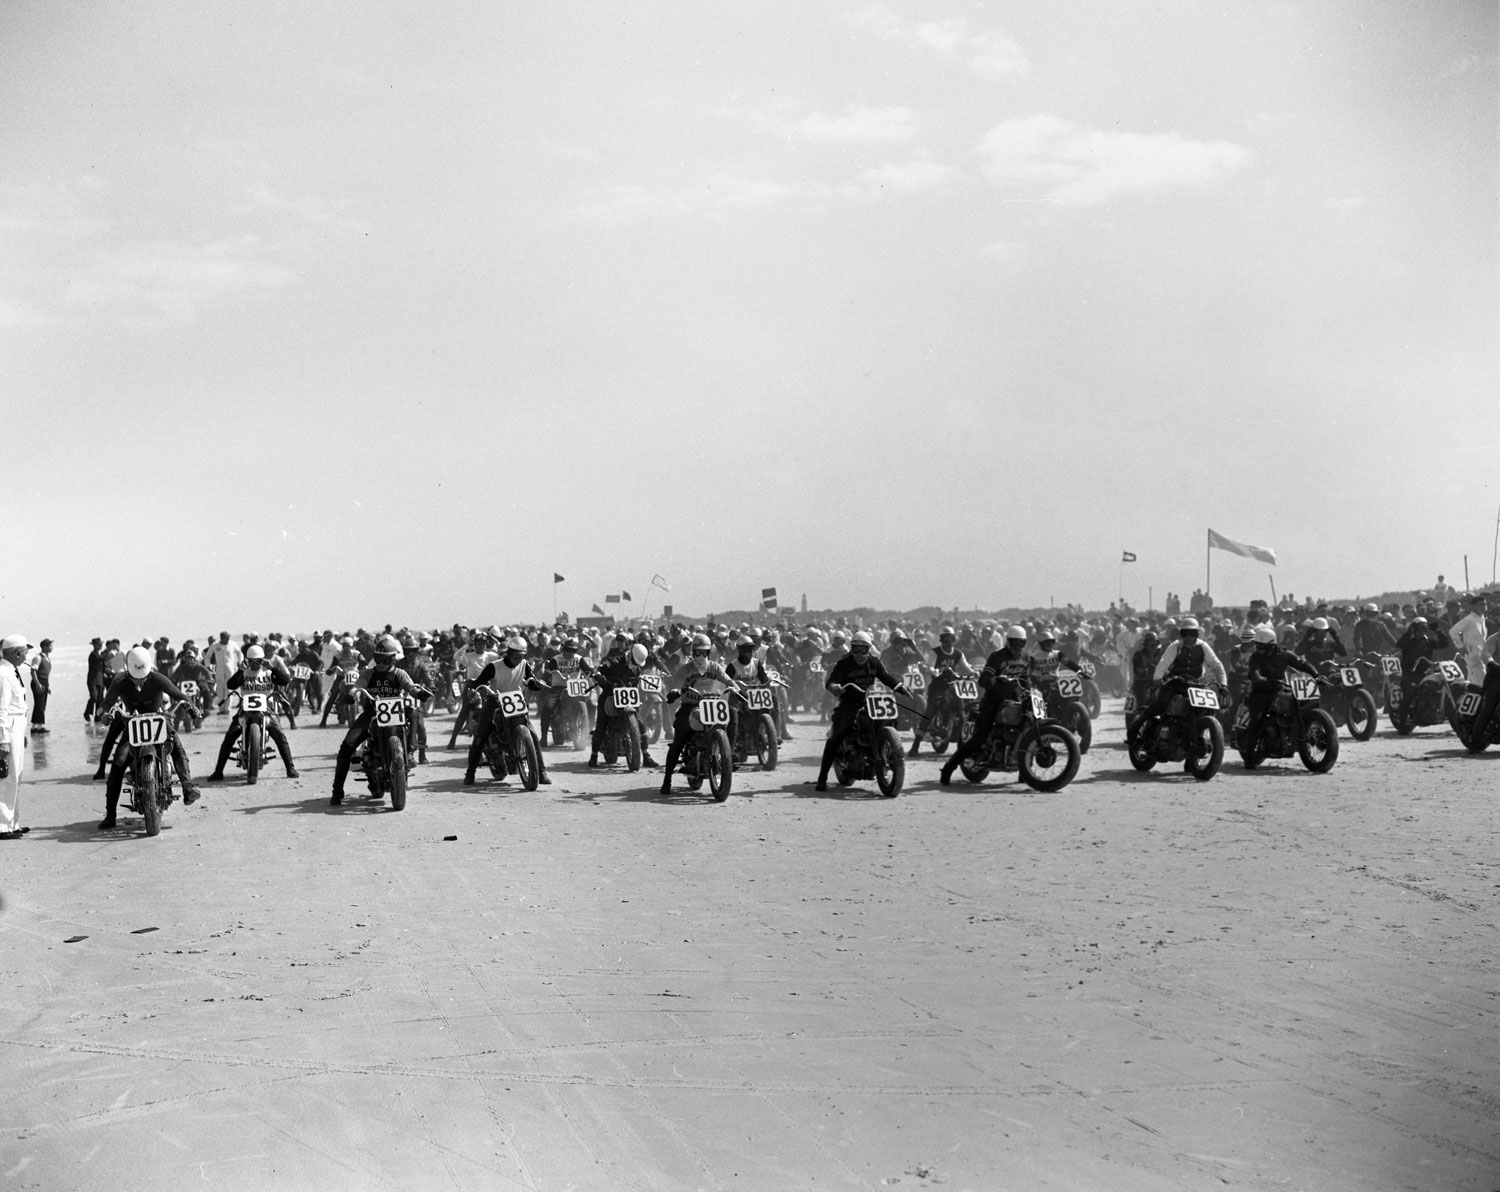 Racers line up at the celebrated Daytona 200 motorcycle race in April 1948.